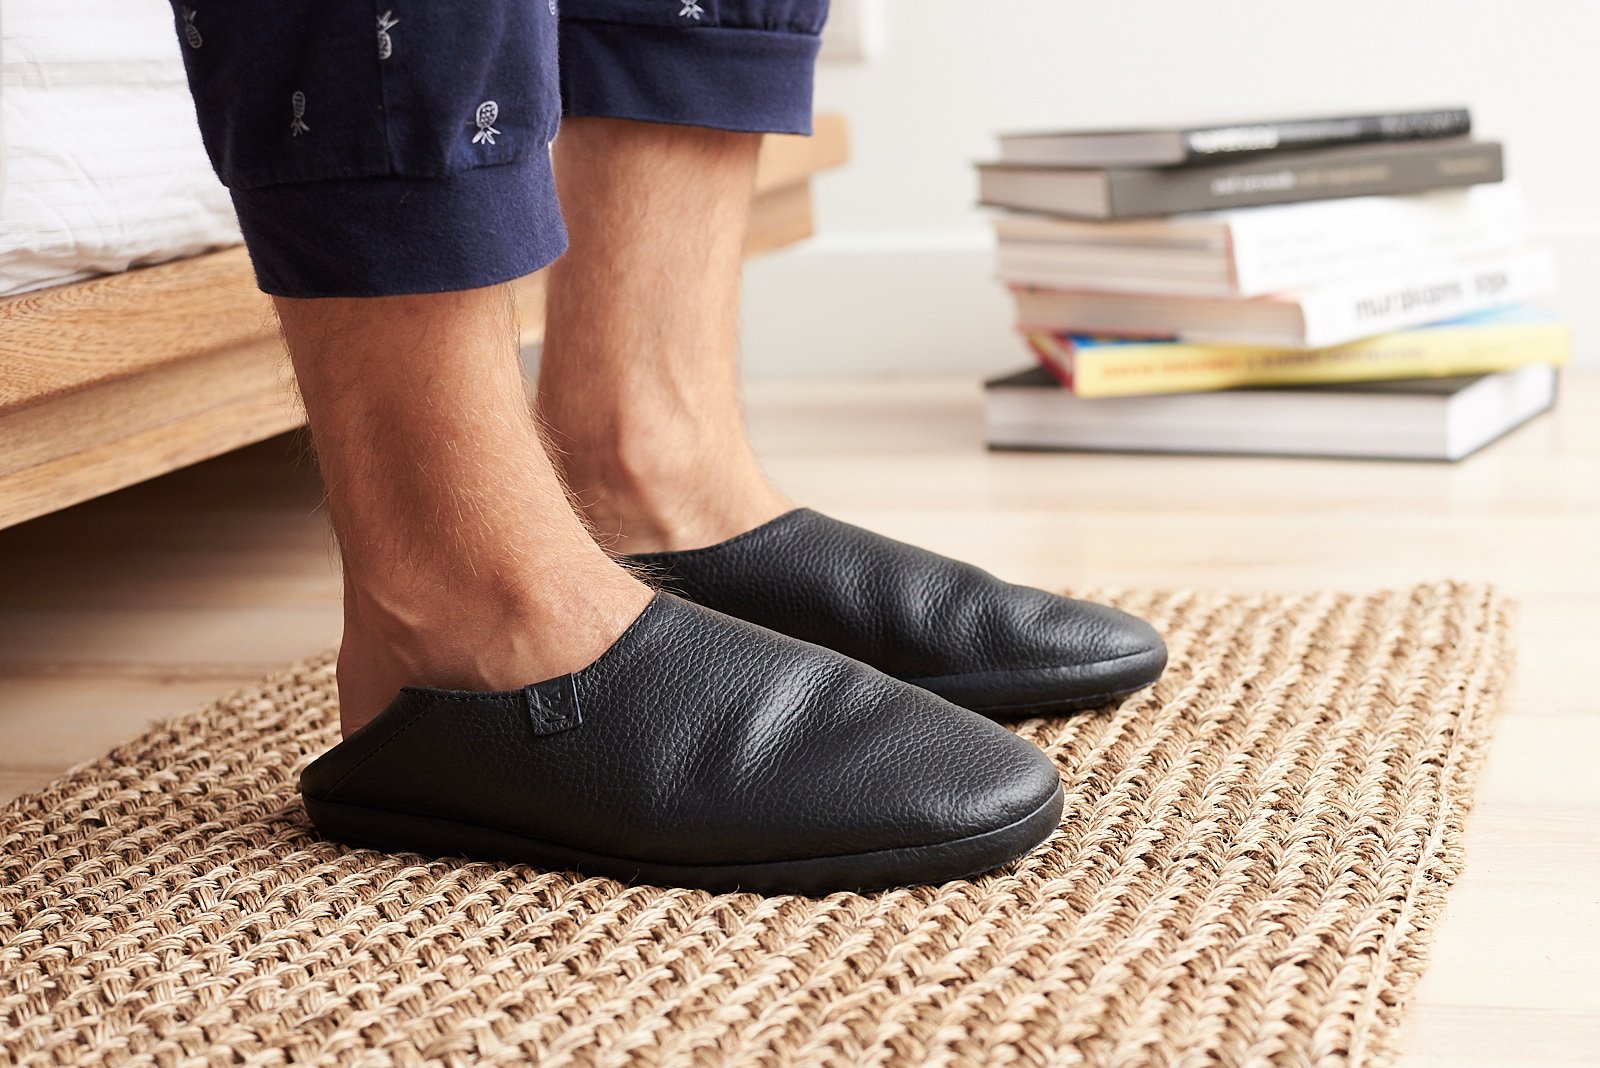 Black home shoes. Slippers and slip on